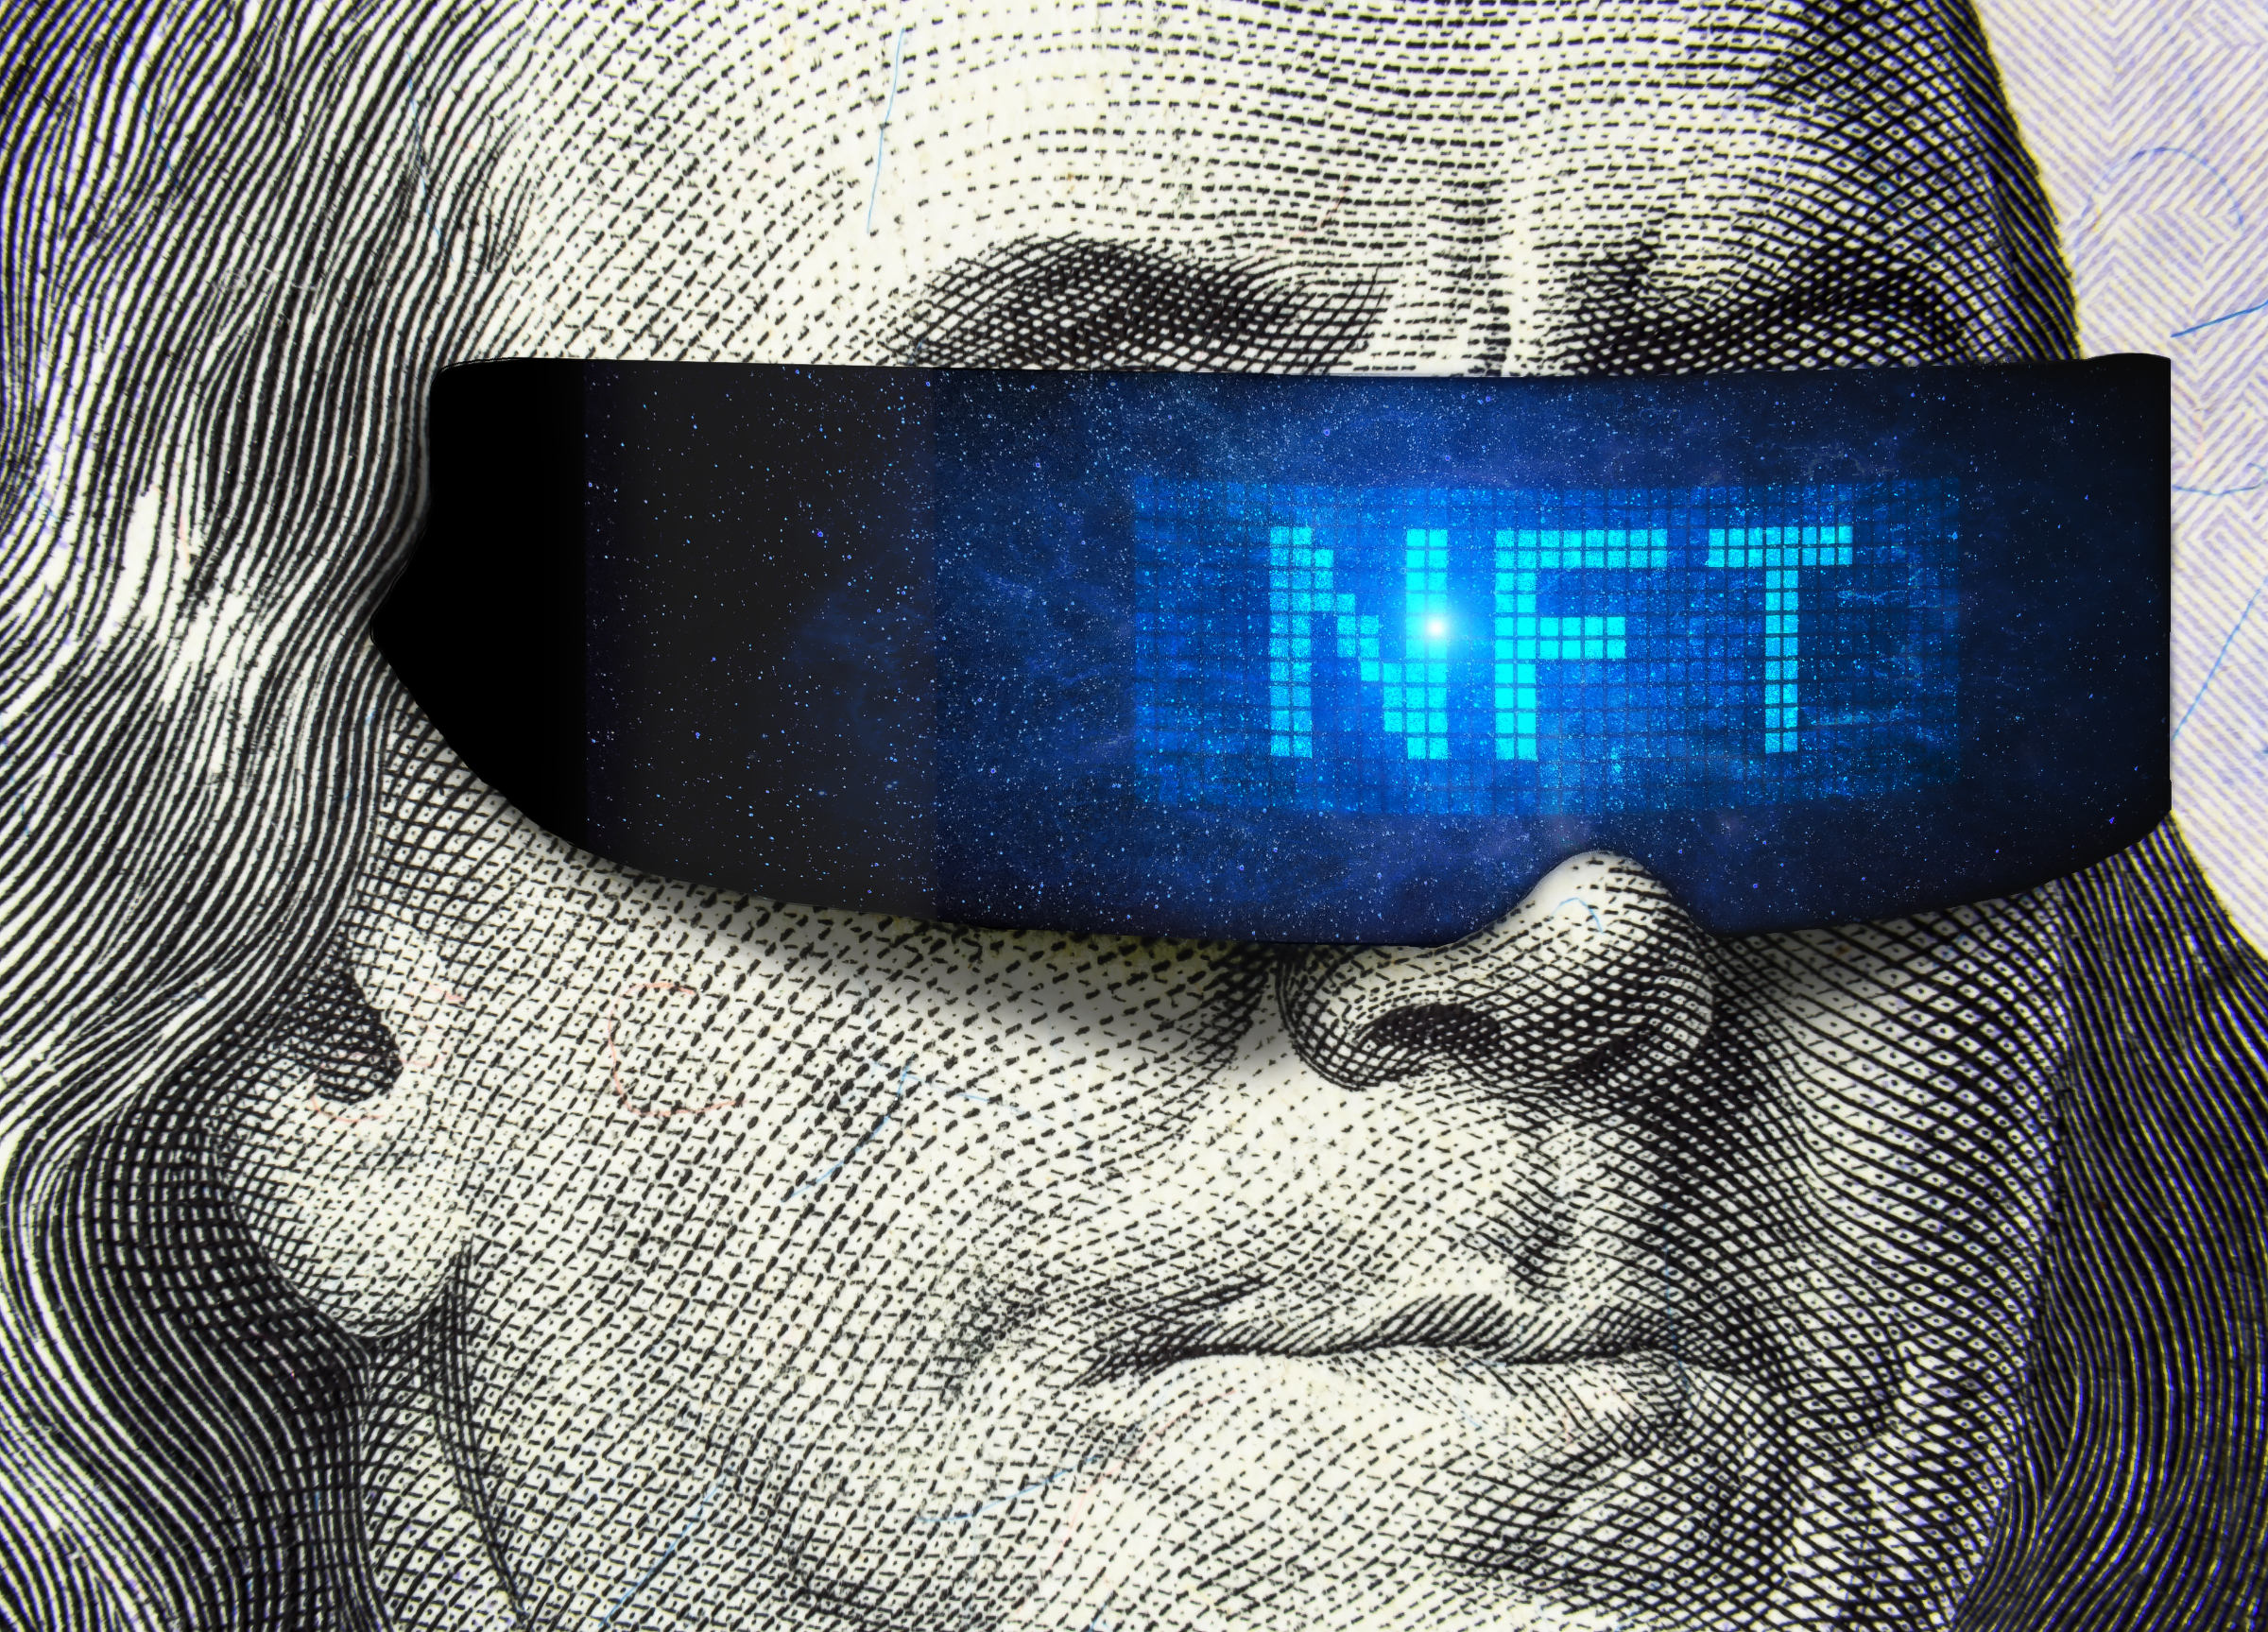 Franklin on 100 dollar bill with cyber glasses for NFT art.